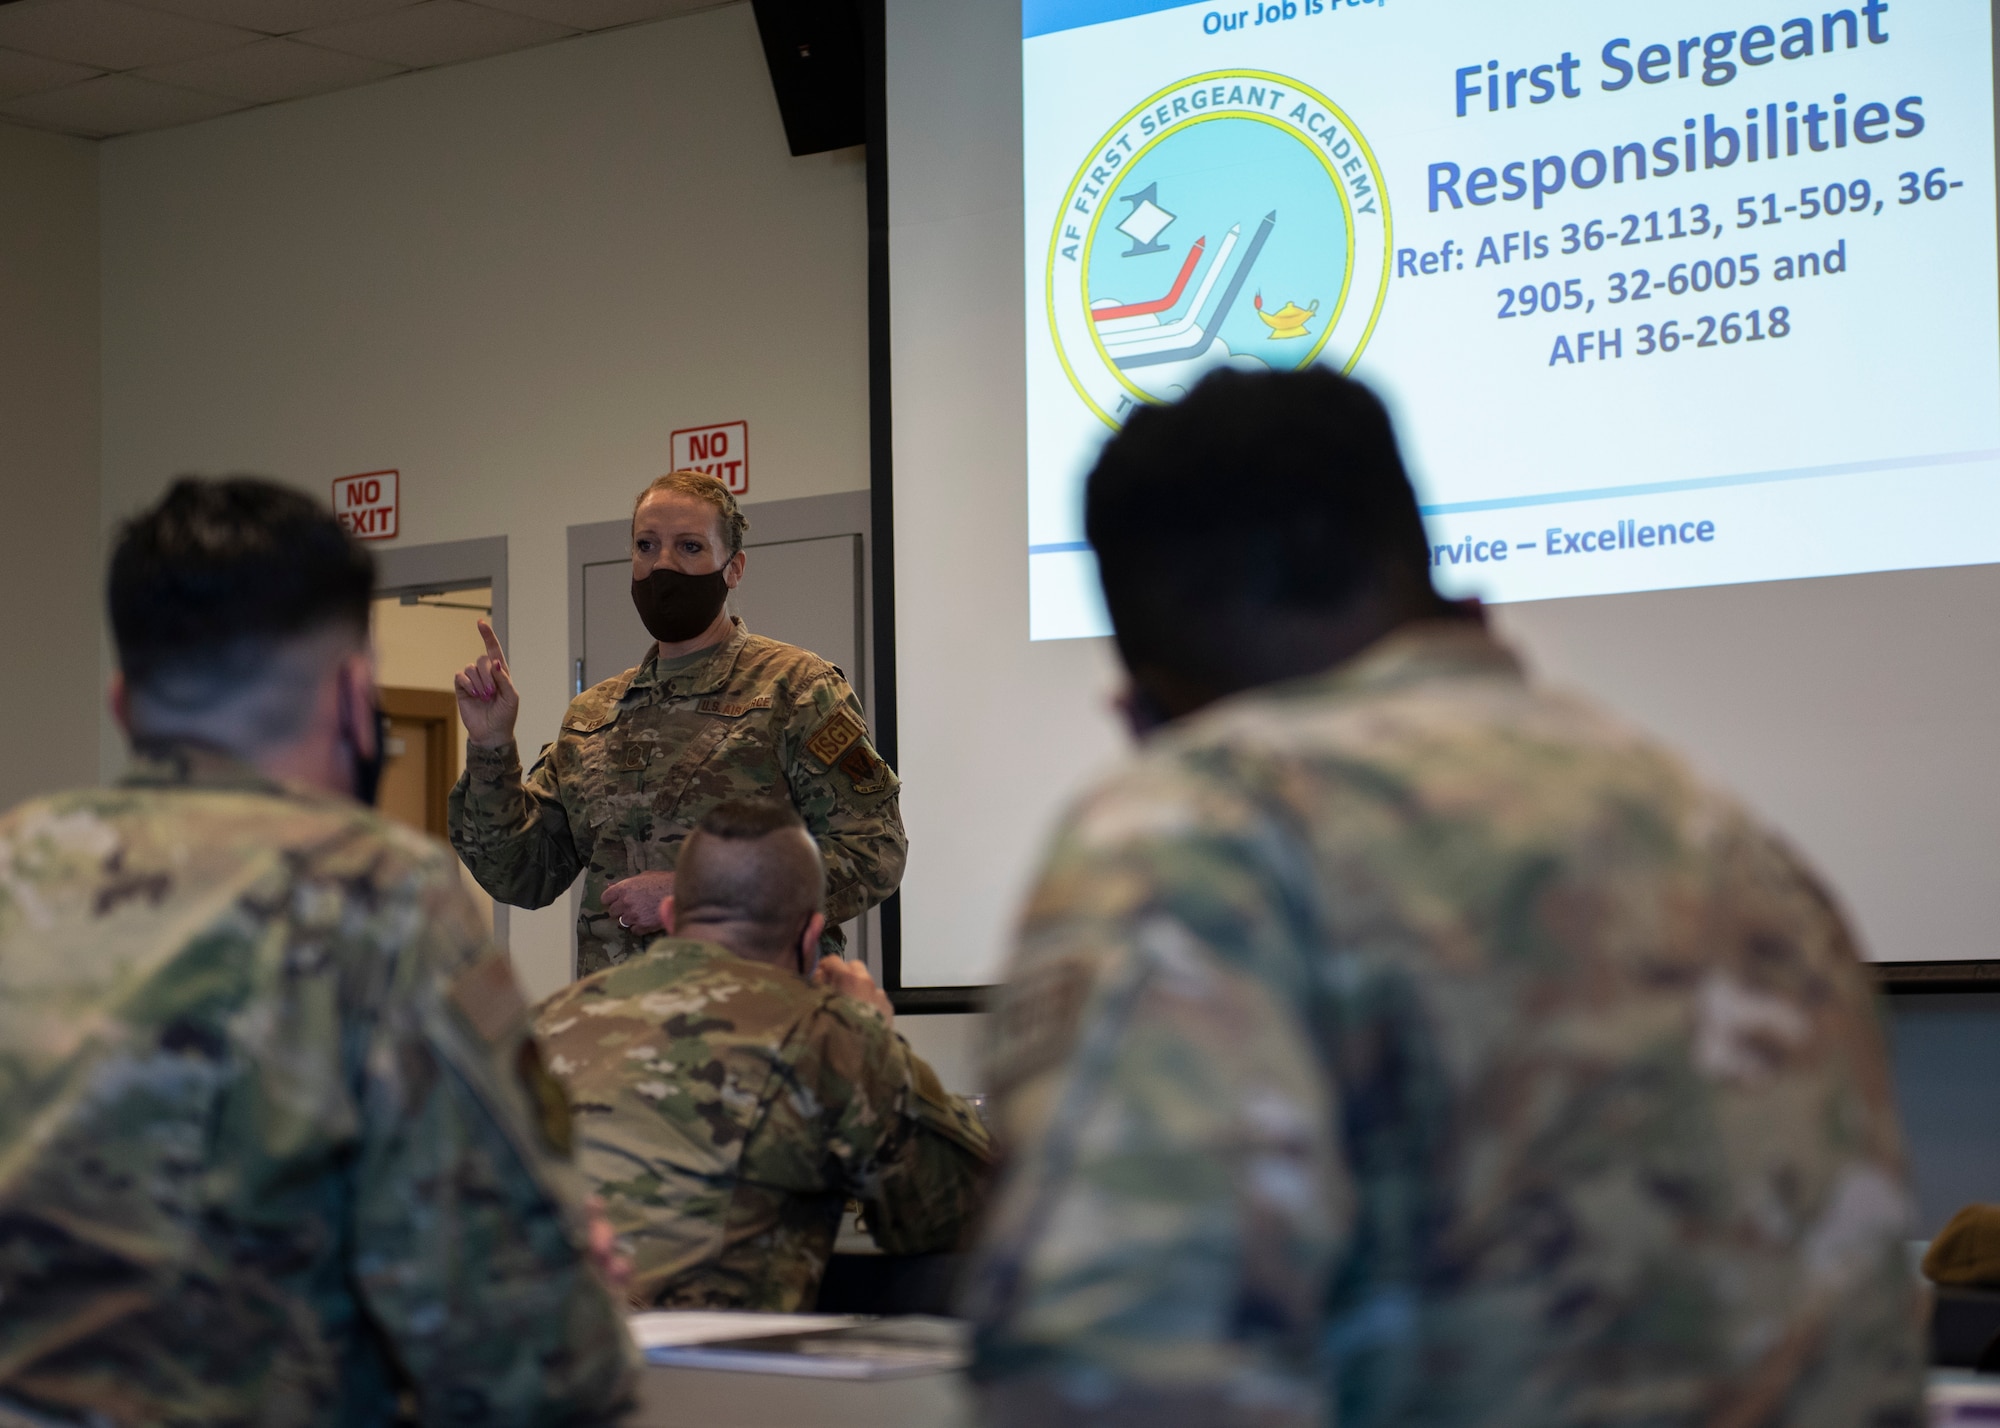 Senior Master Sgt. Victoria Kenny, the 102nd Intelligence Wing First Sergeant, discusses the importance of taking care of fellow Airmen, Guardians and their families in being an effective leader during the Joint Force Additional Duty First Sergeant Course, on Otis Air National Guard Base, Massachusetts, May 10, 2022. Attendees were taught to understand the responsibility of a first sergeant to respond to the needs of unit members 24 hours a day, 7 days a week. (U.S. Air National Guard photo by Airman 1st Class Francesca Skridulis)